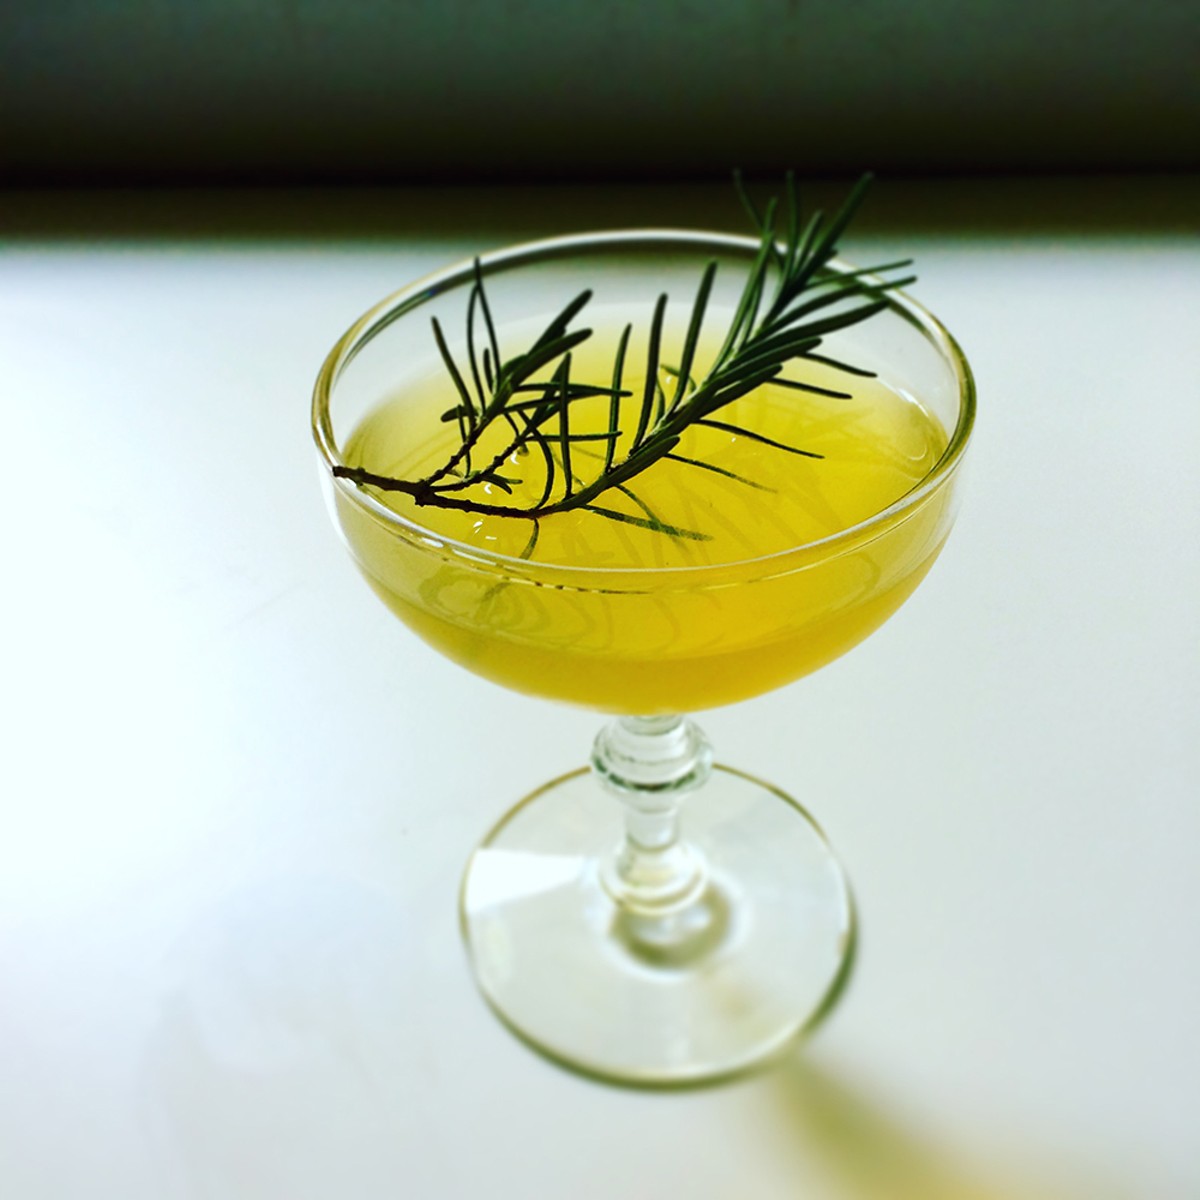 Give thanks to The Last Word, a forgotten classic cocktail